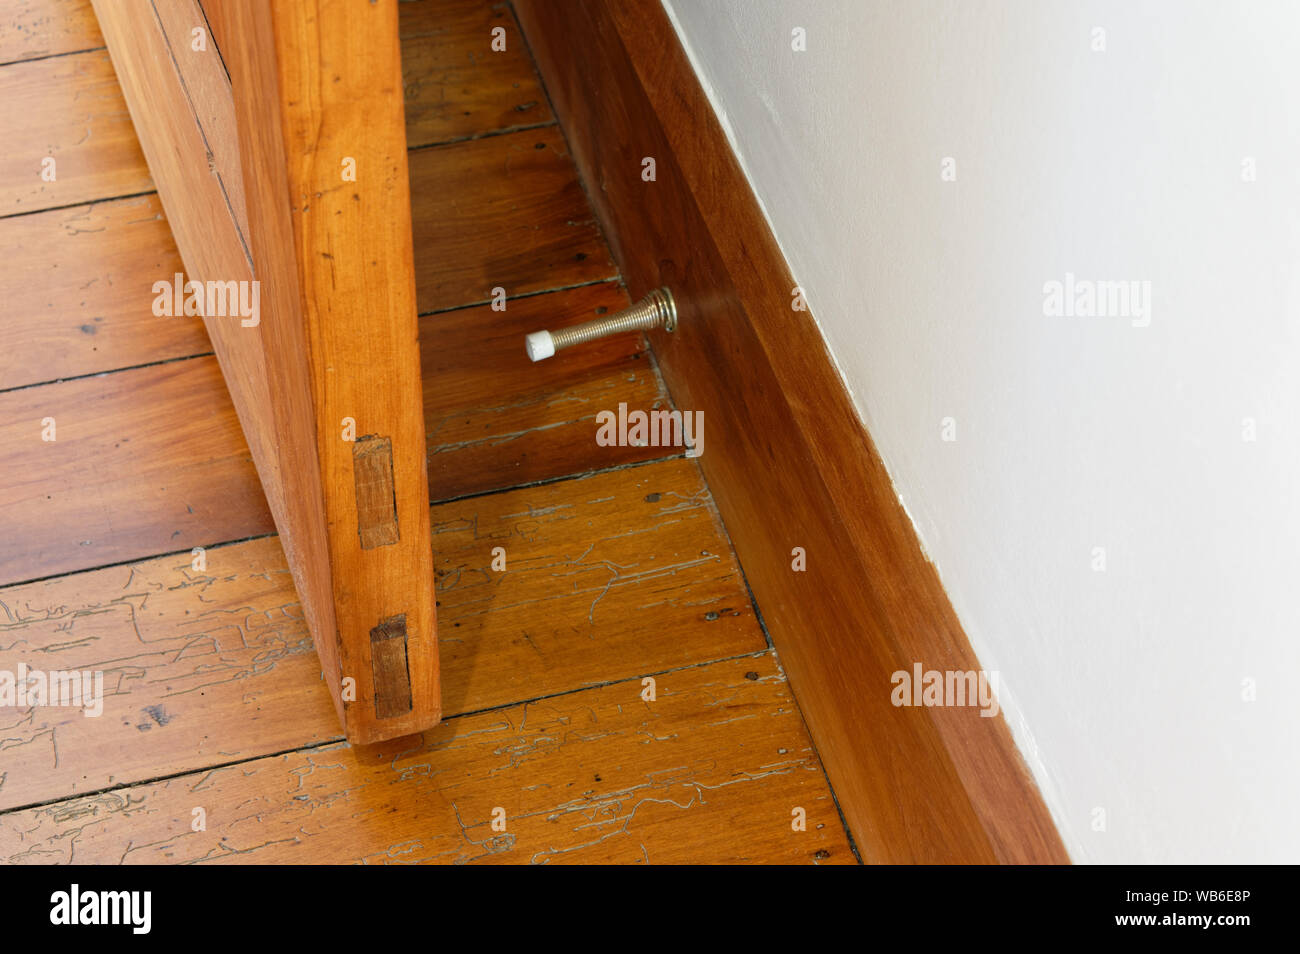 A spring door stopper is attached to a wooden skirting board to prevent the door from hitting the wall Stock Photo